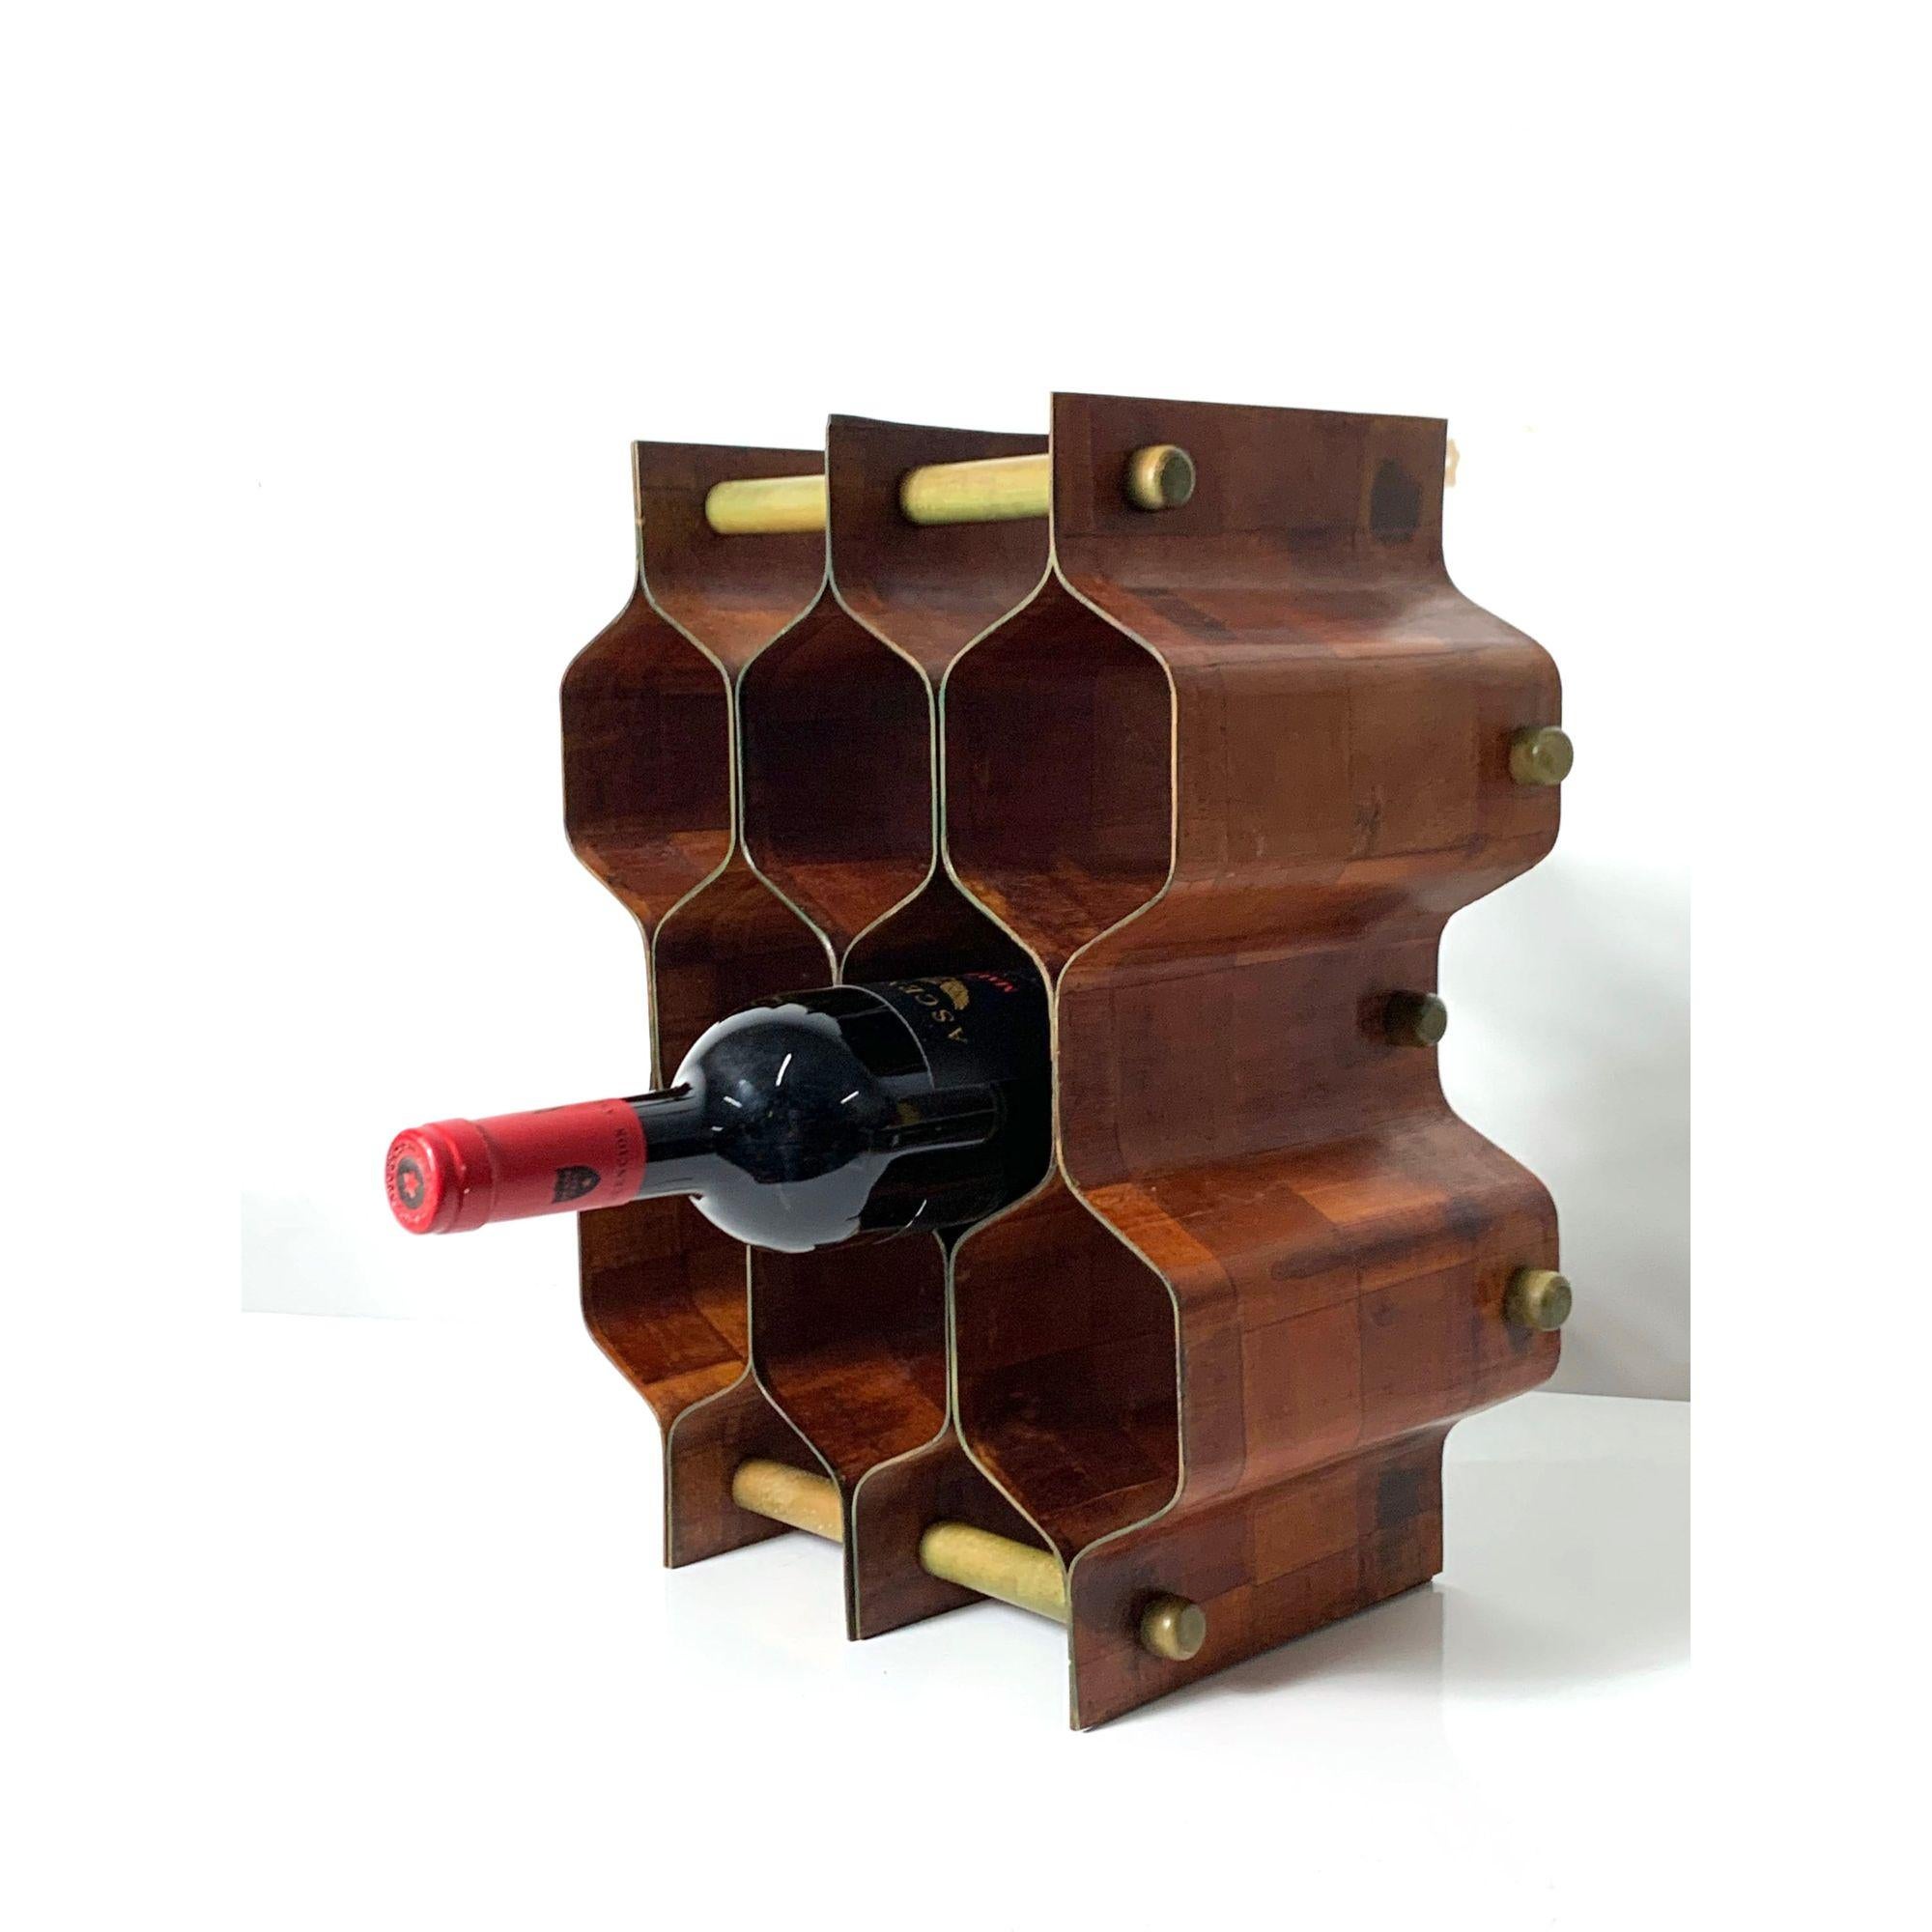 Mid Century Wine Rack by Torsten Johansson 1960s

Sculptural wine rack designed by Torsten Johansson for AB Formtra, Sweden 1960's.
Bentwood construction with mixed wood parquet pattern, can be placed horizontally or vertically.

Additional